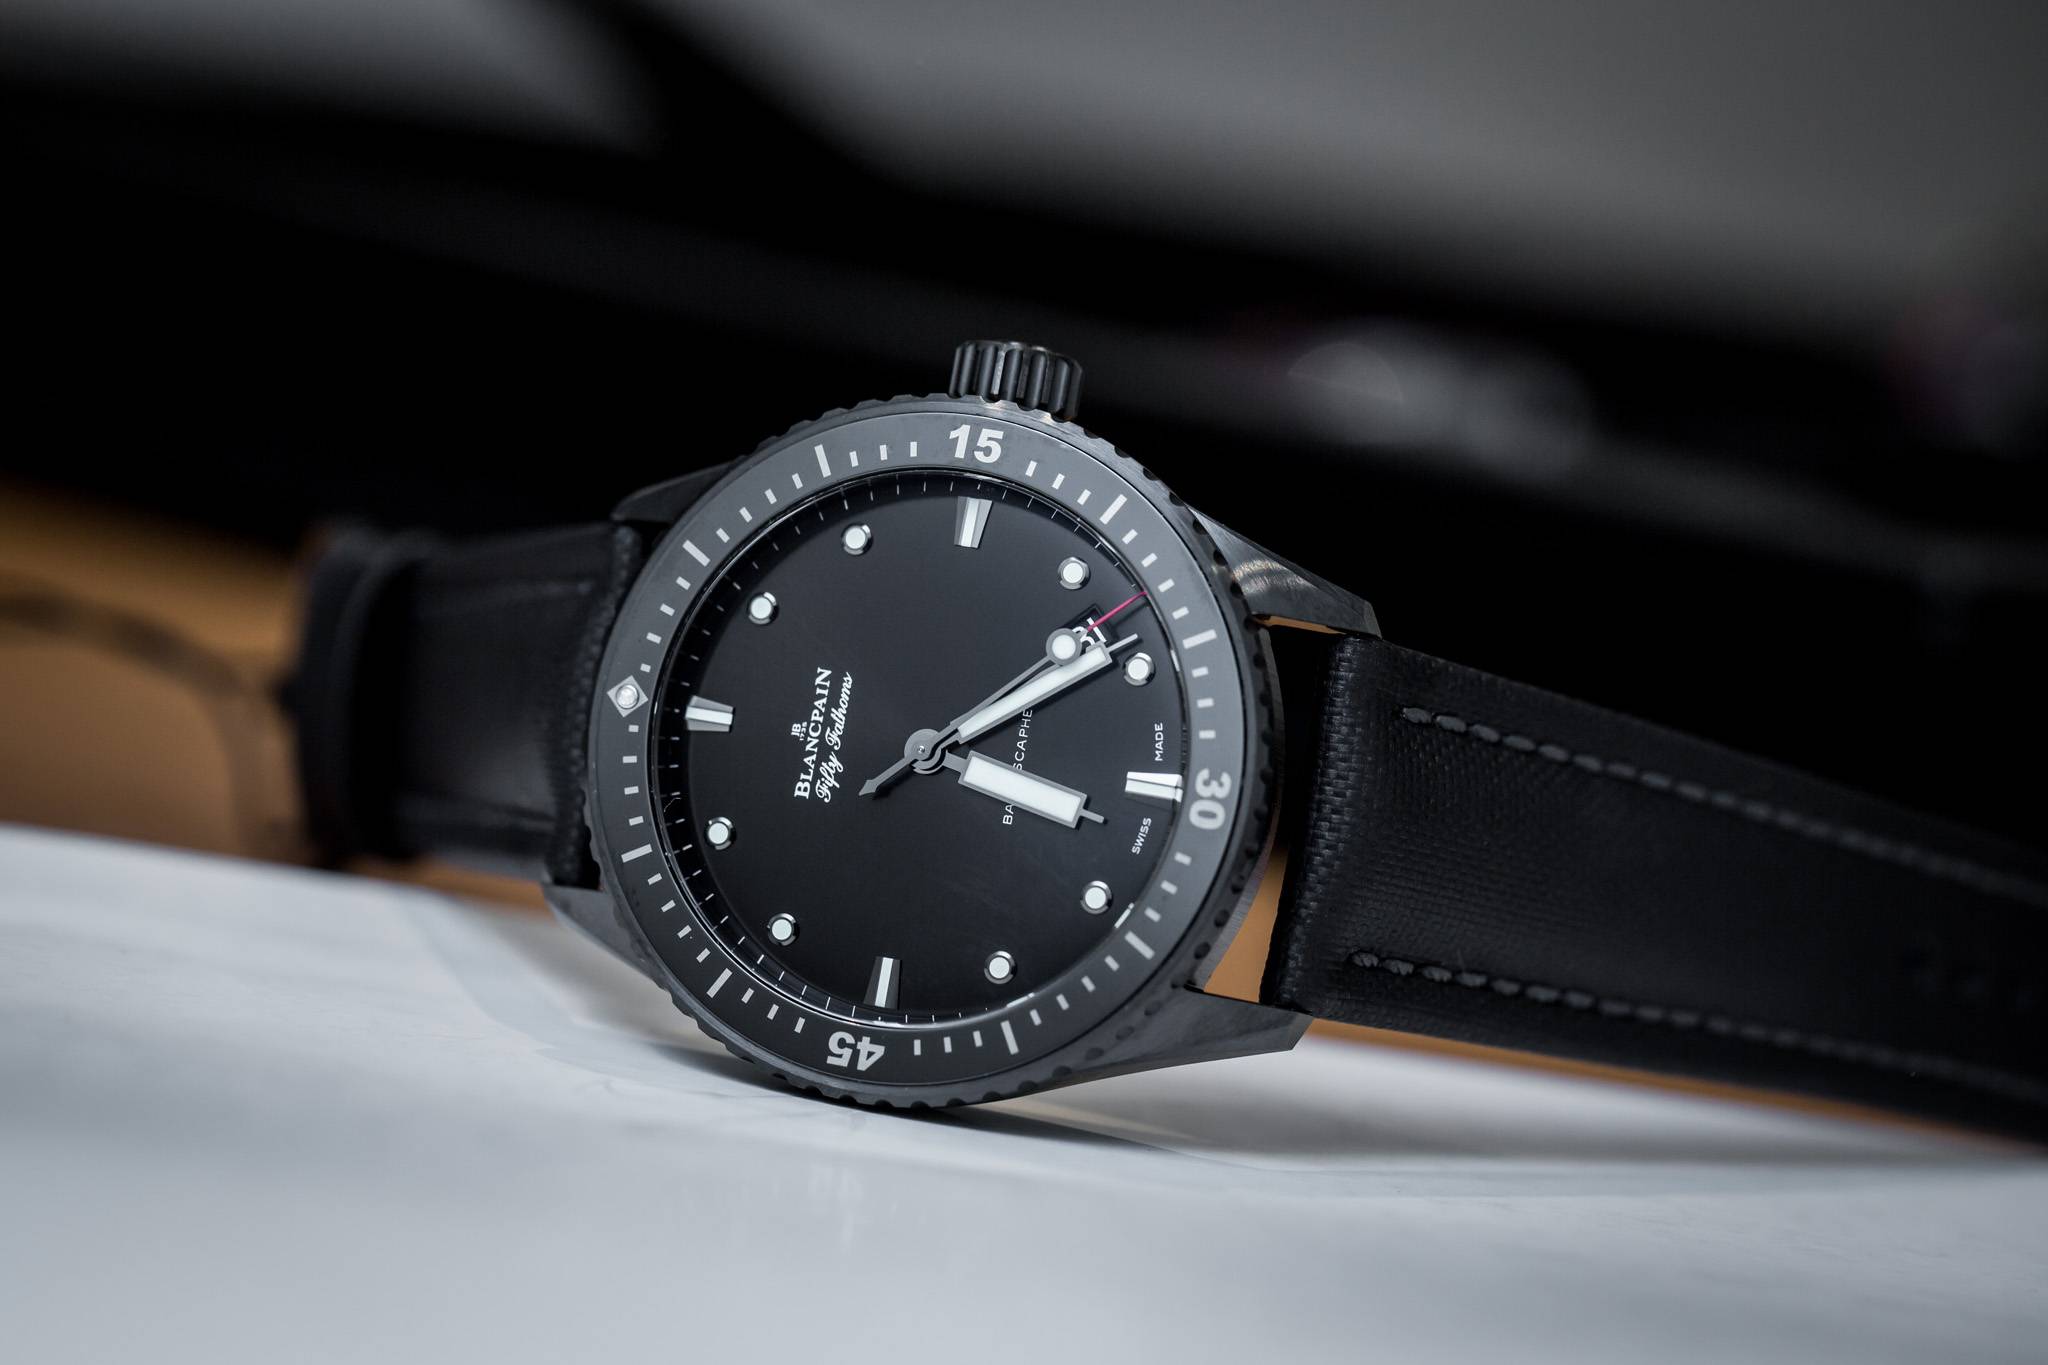 Hands On The Blancpain Fifty Fathoms Bathyscaphe In Ceramic